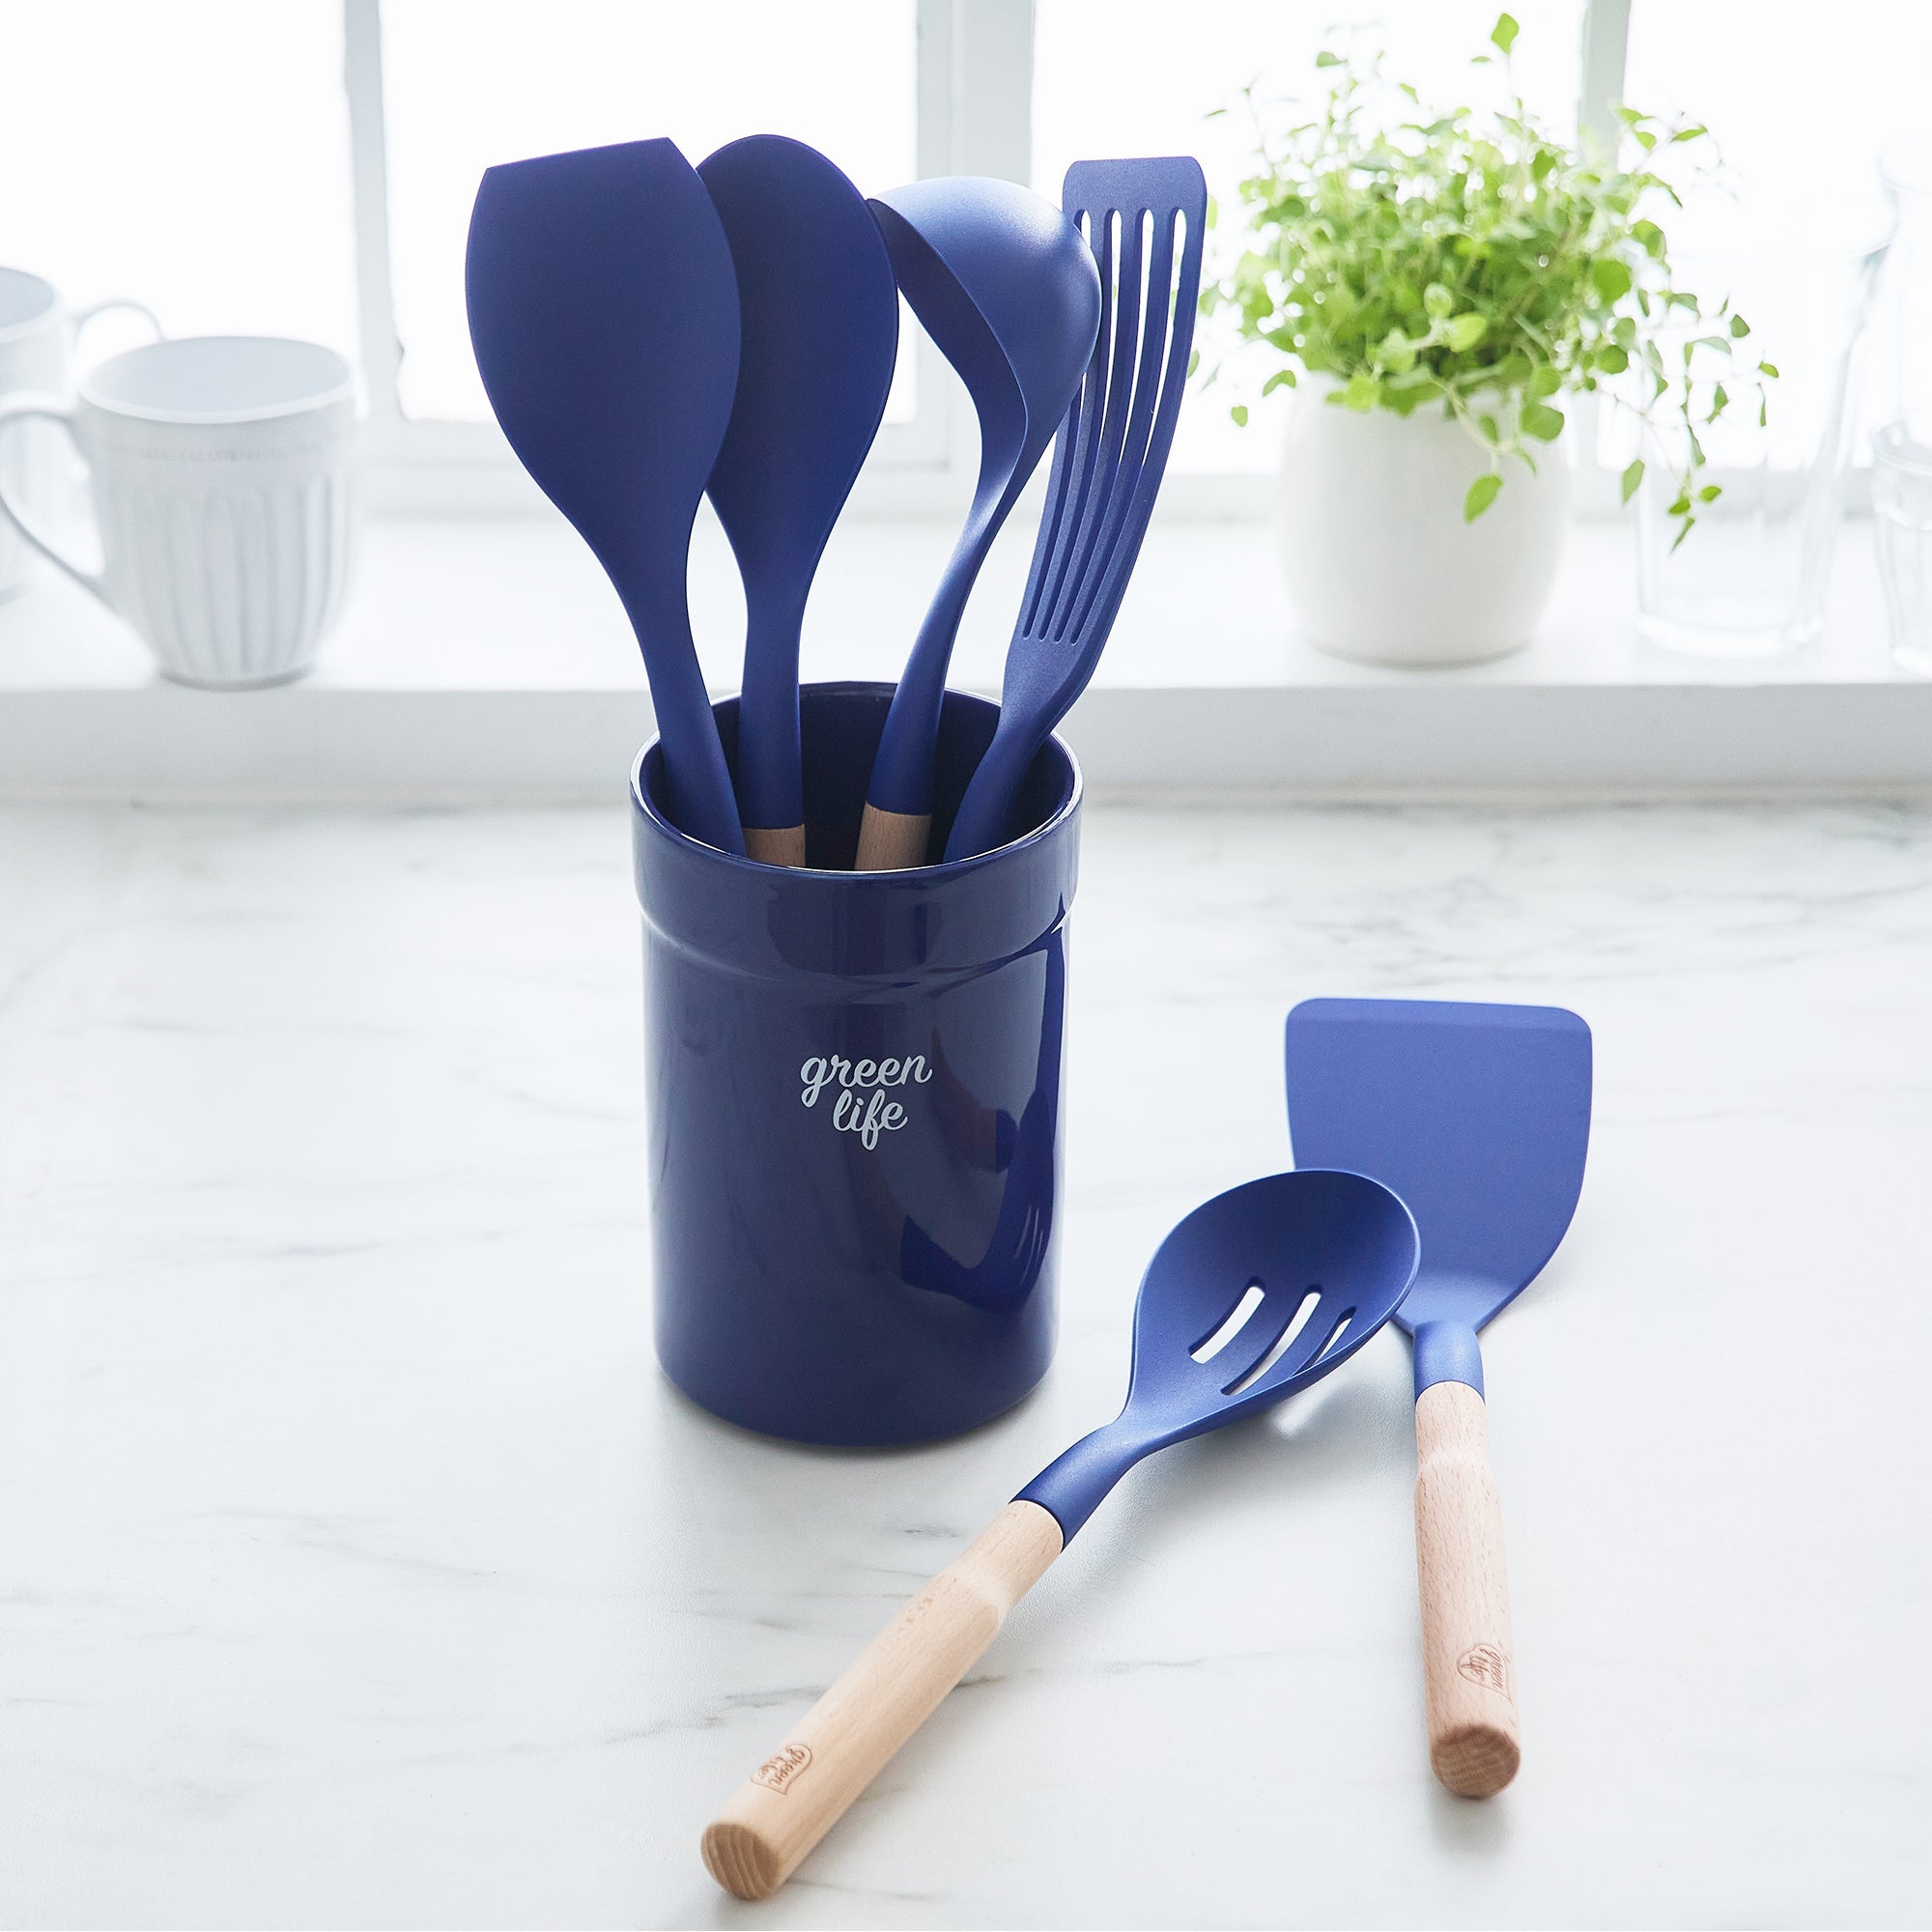 Cook's Tools: Up to 50% Off